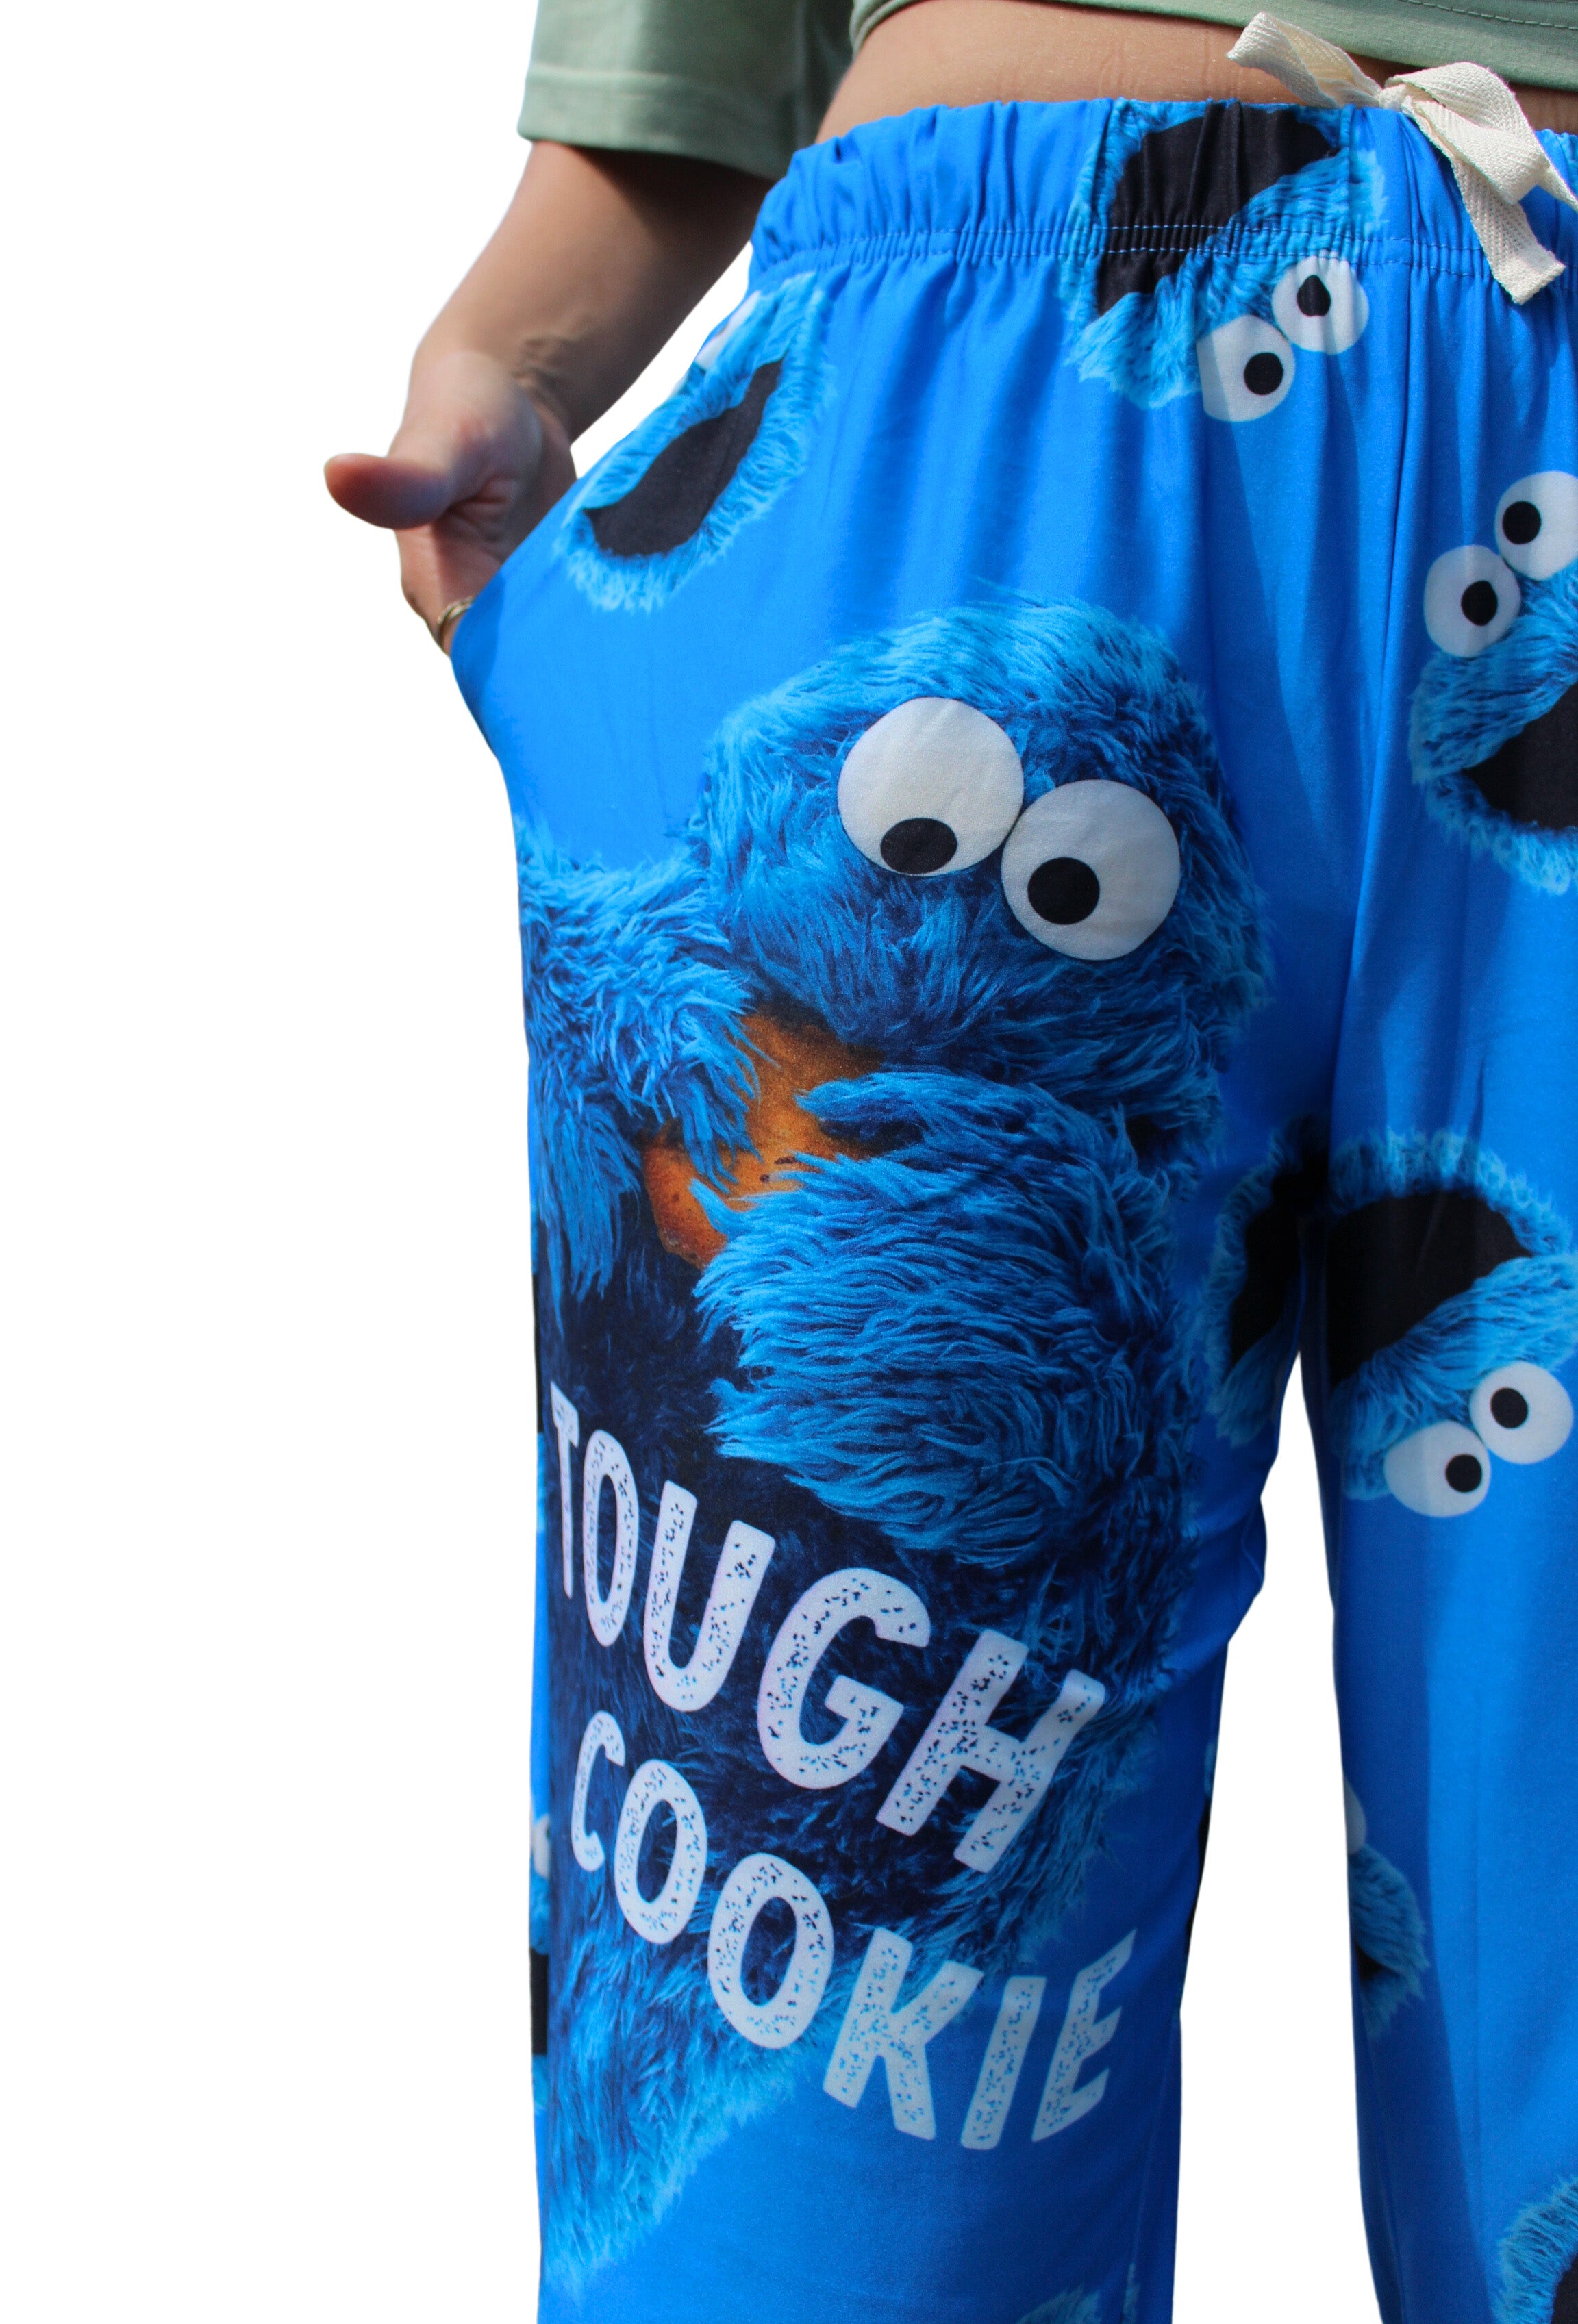 Tough Cookie Pajama Lounge Pants close up view of big cookie monster graphic with "tough cookie" text